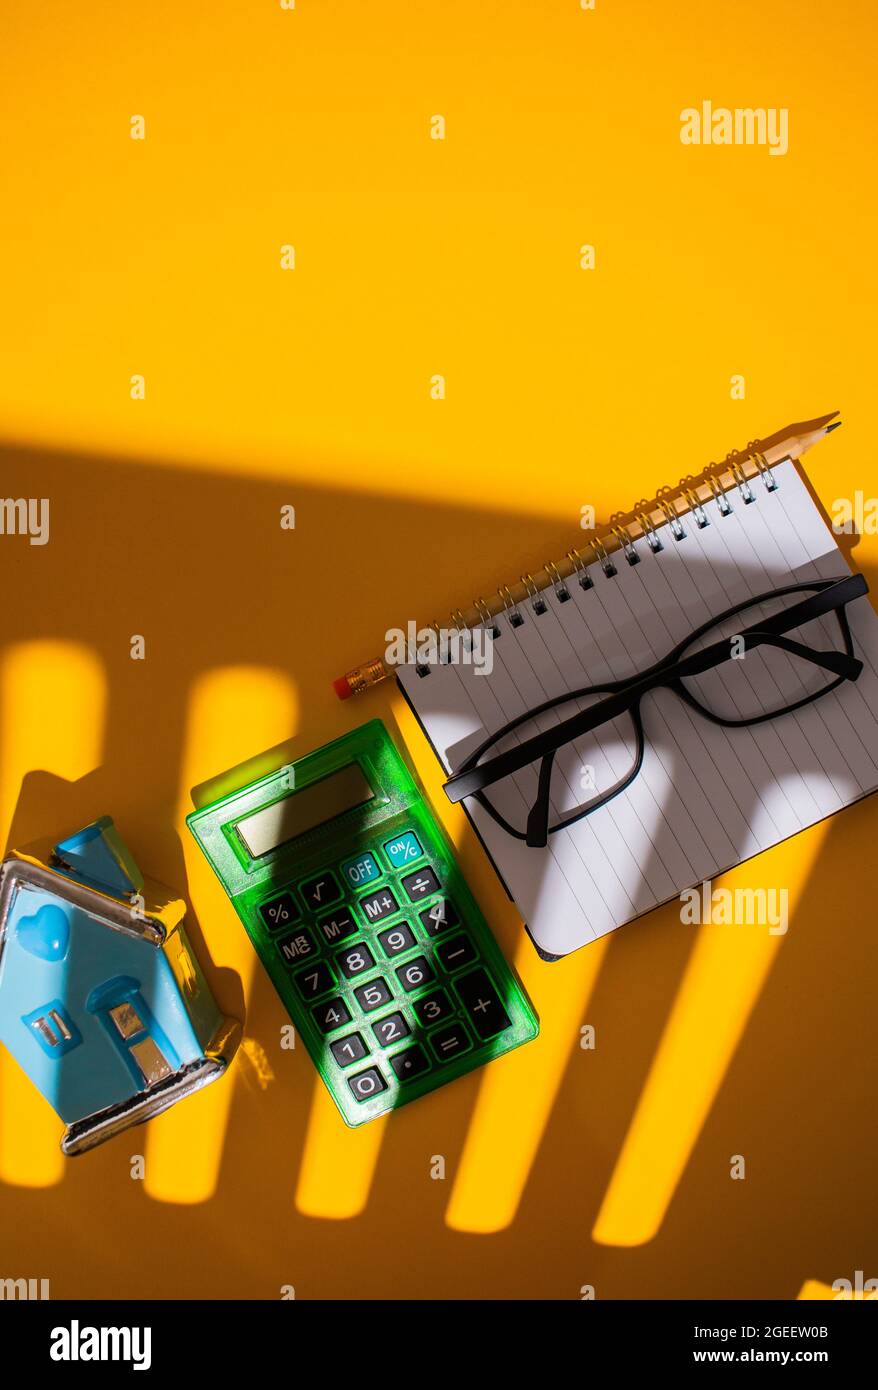 Vertical top view of a vibrant orange shadowy table with stationery on it next to a blue house toy Stock Photo